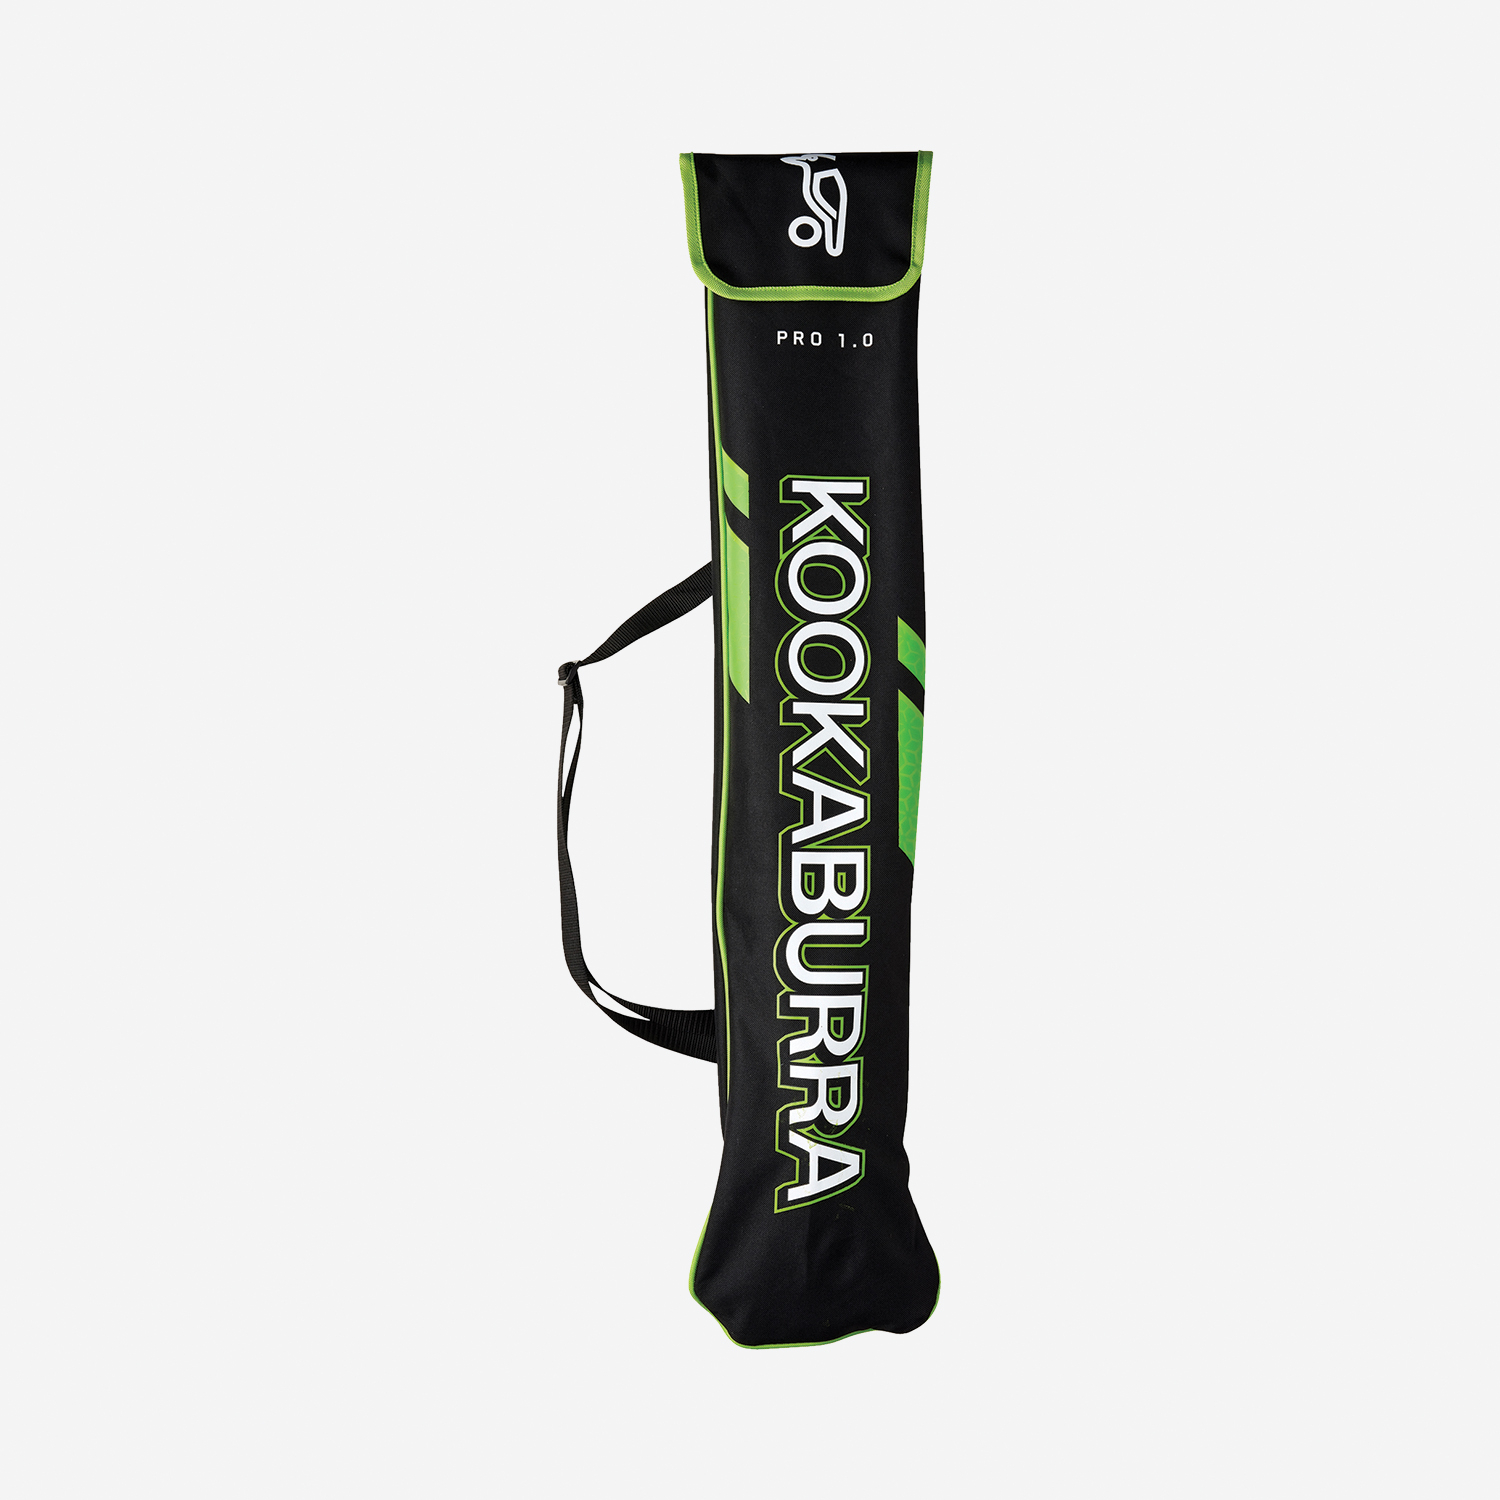 Pro 1.0 Players Bat Cover